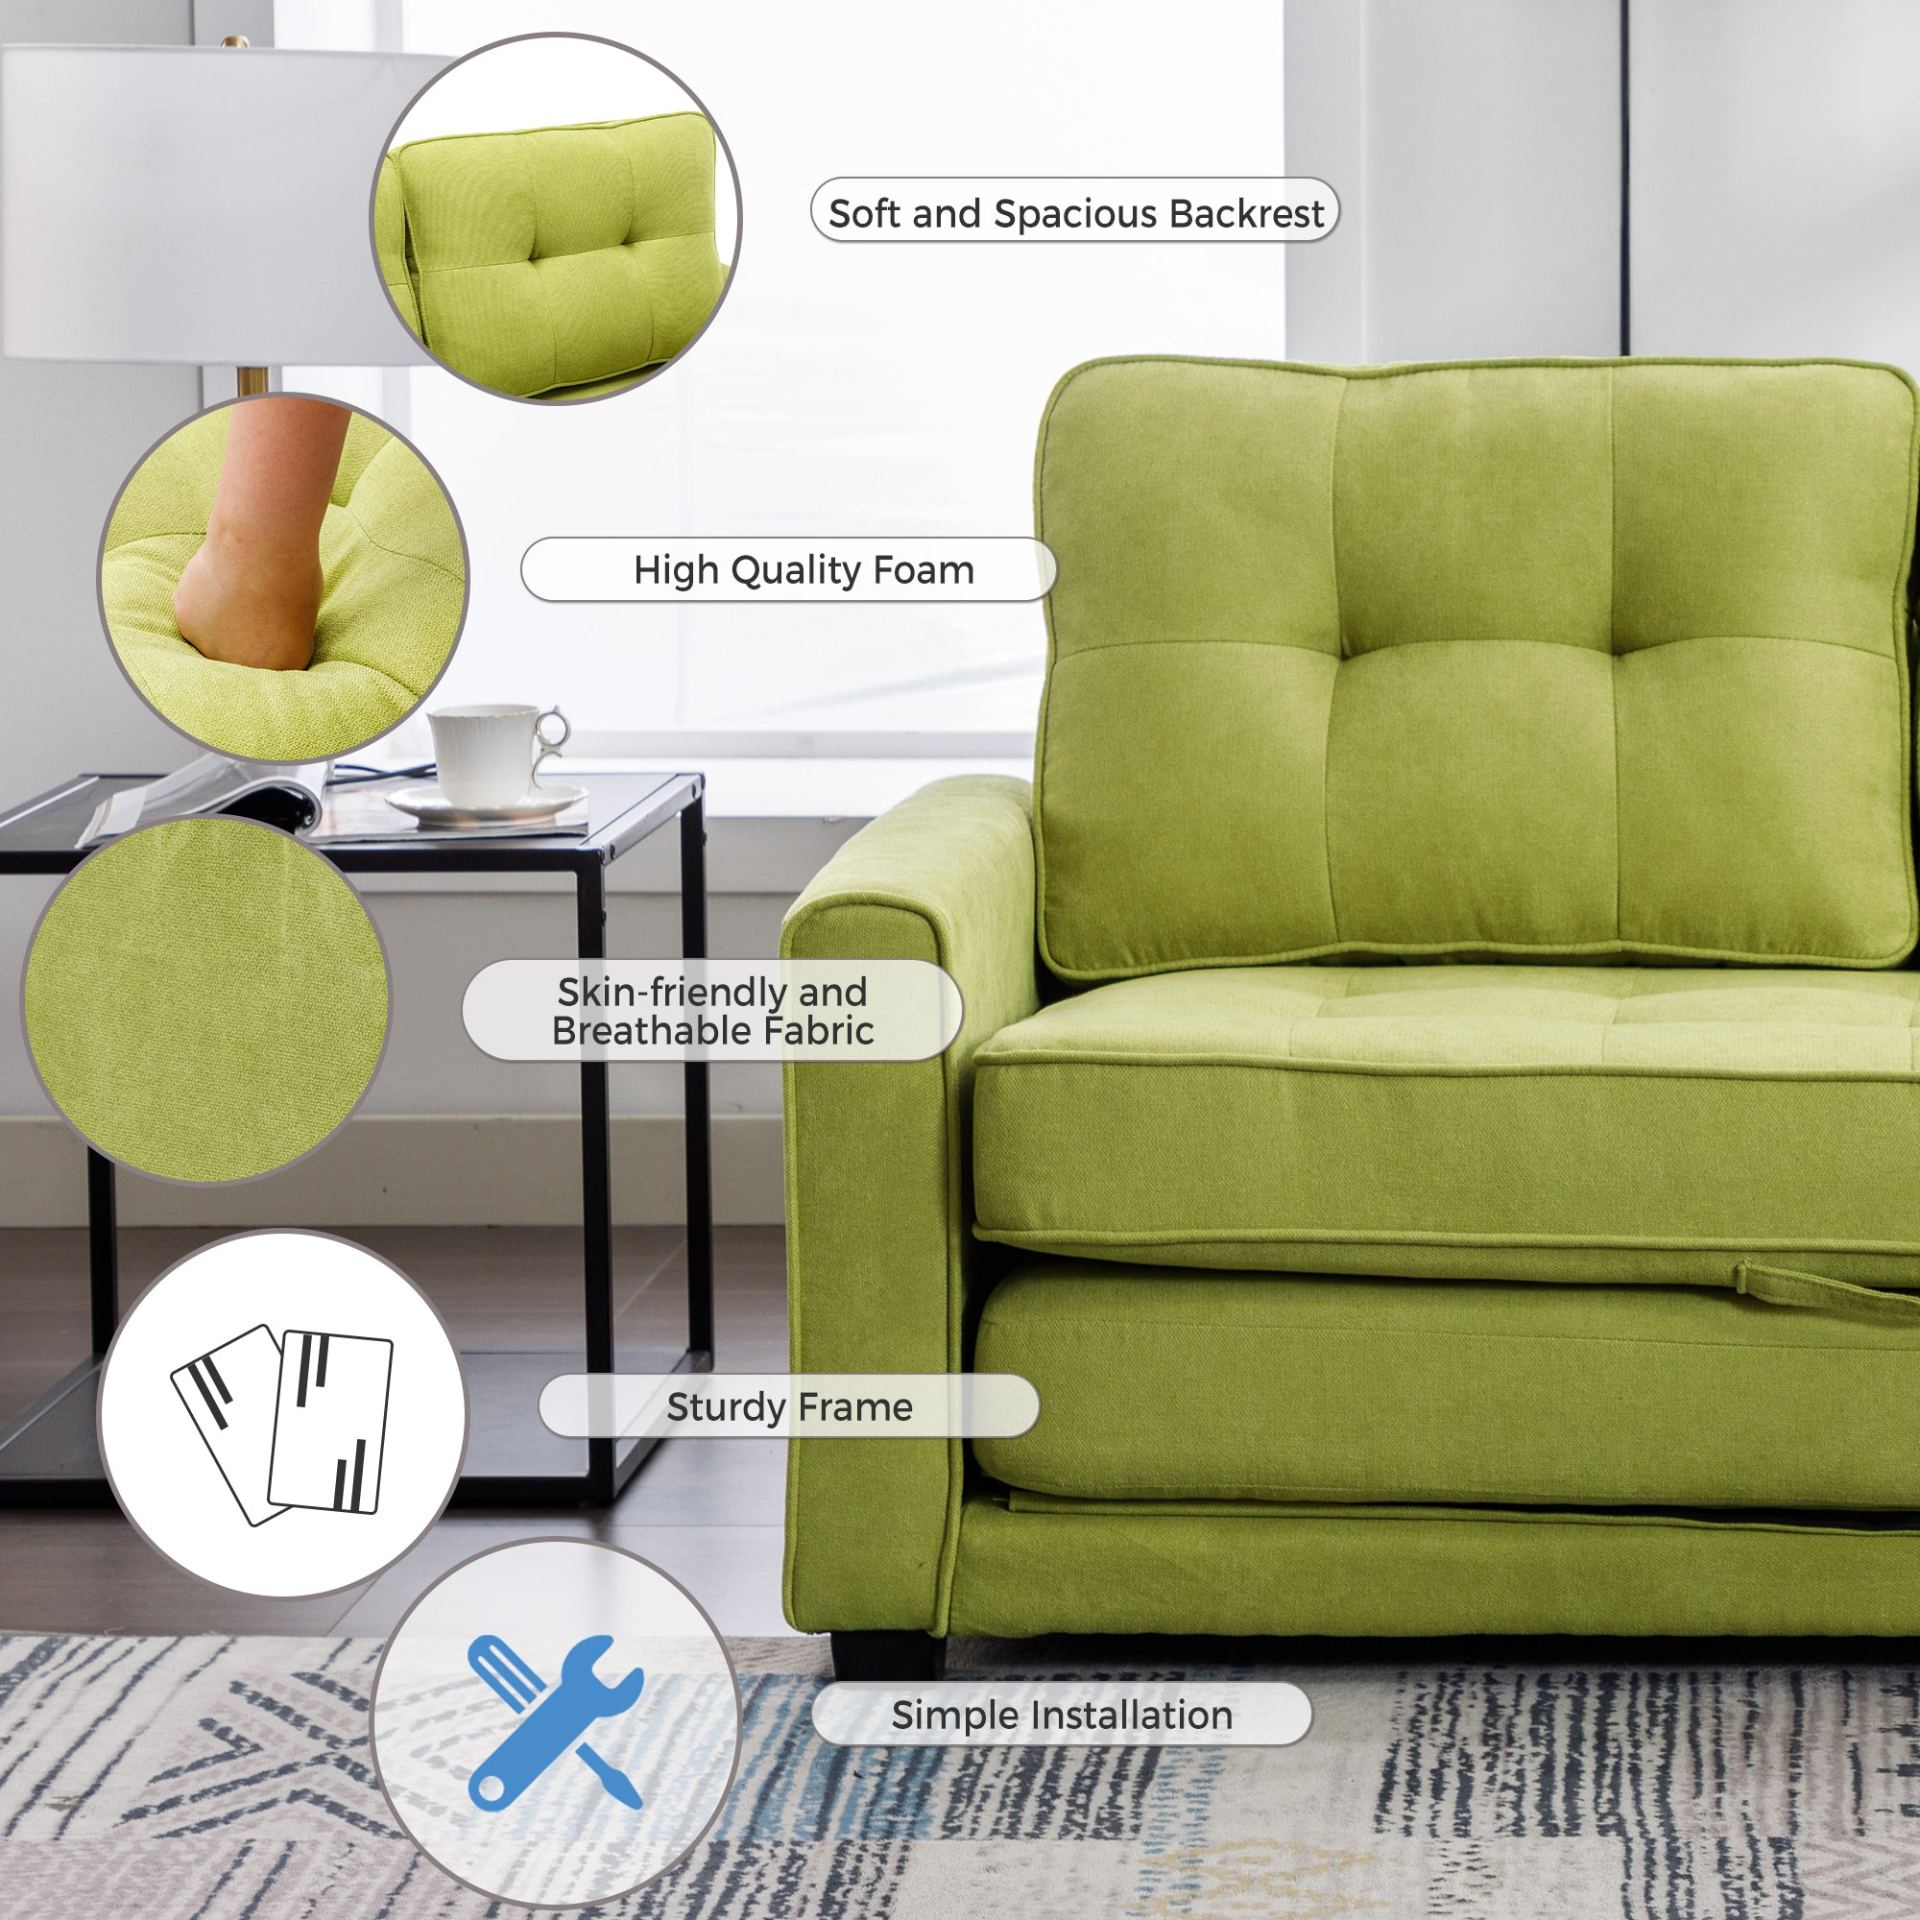 Bright Green - Contemporary Loveseat Style Sofa with Pull-Out Bed (59")